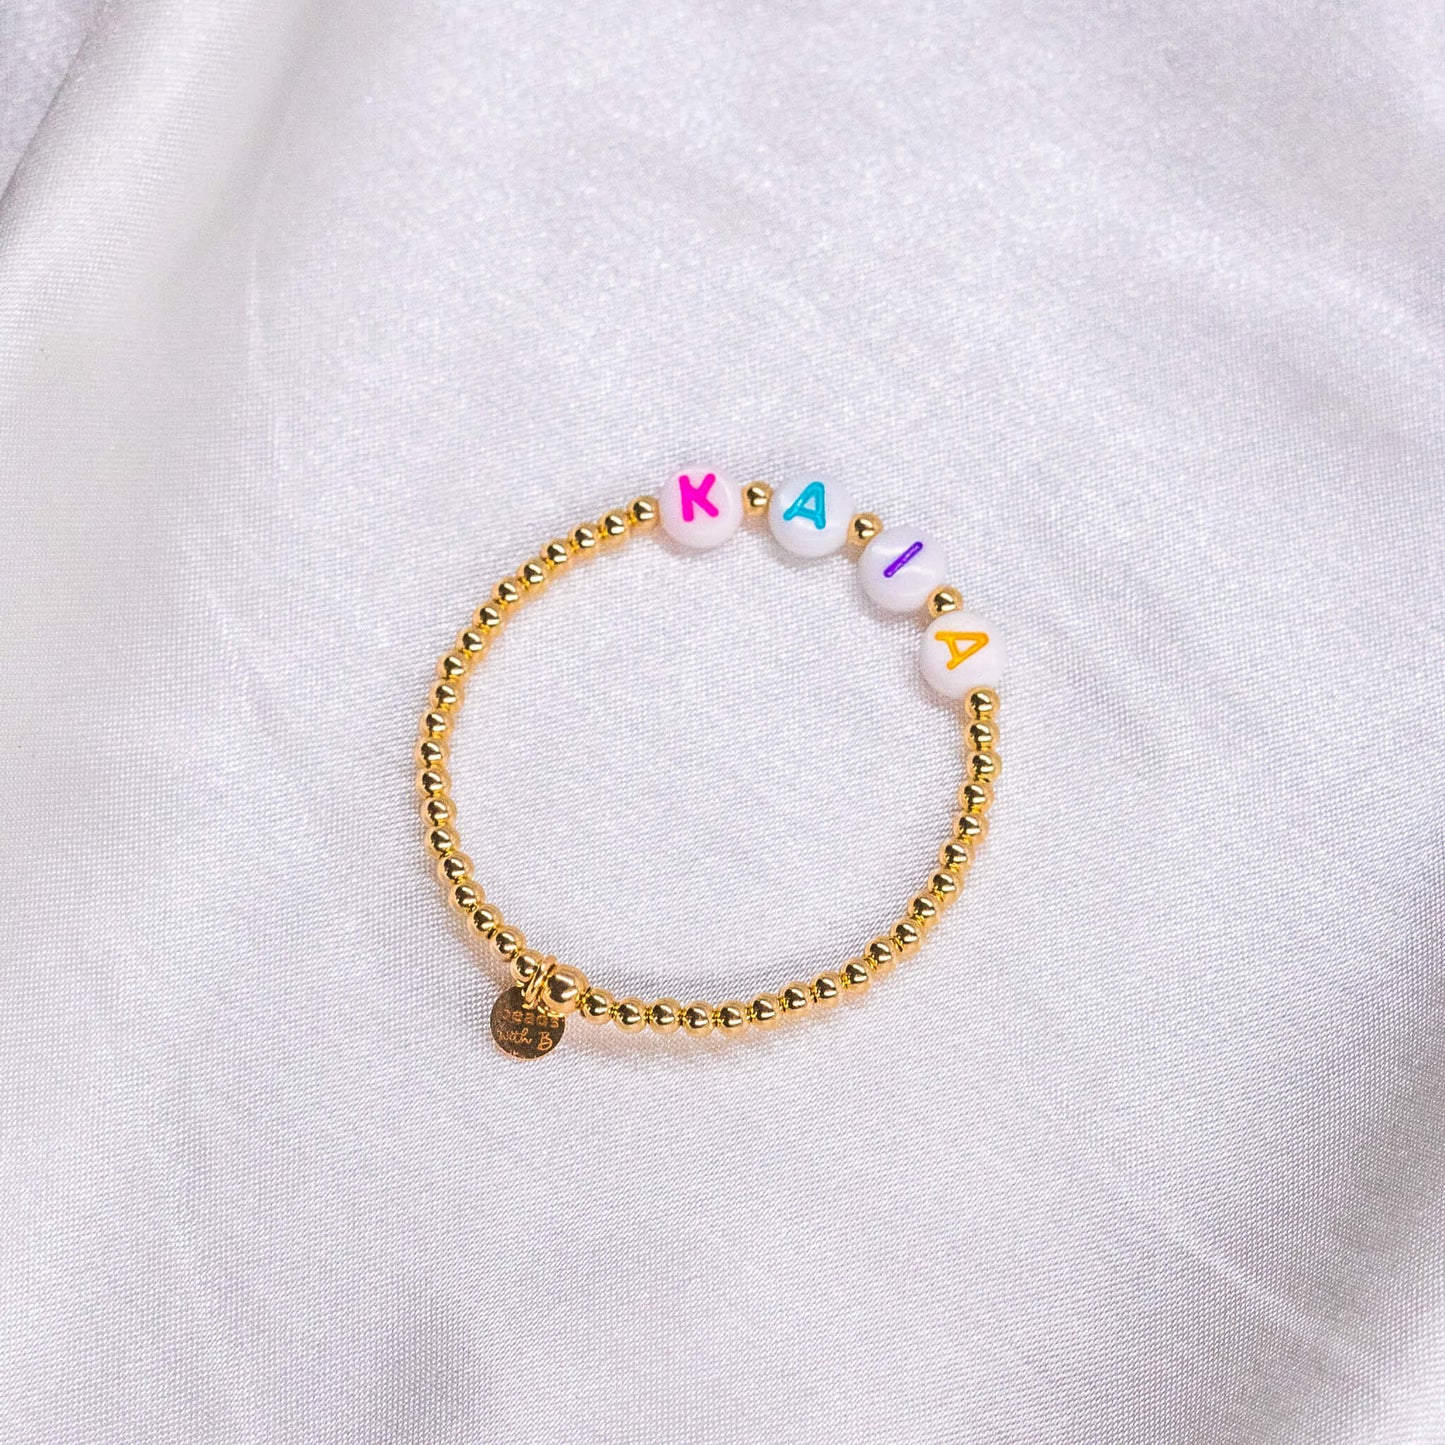 Custom 14K Gold Filled Bracelet w/ White Round Beads & Colored Letters